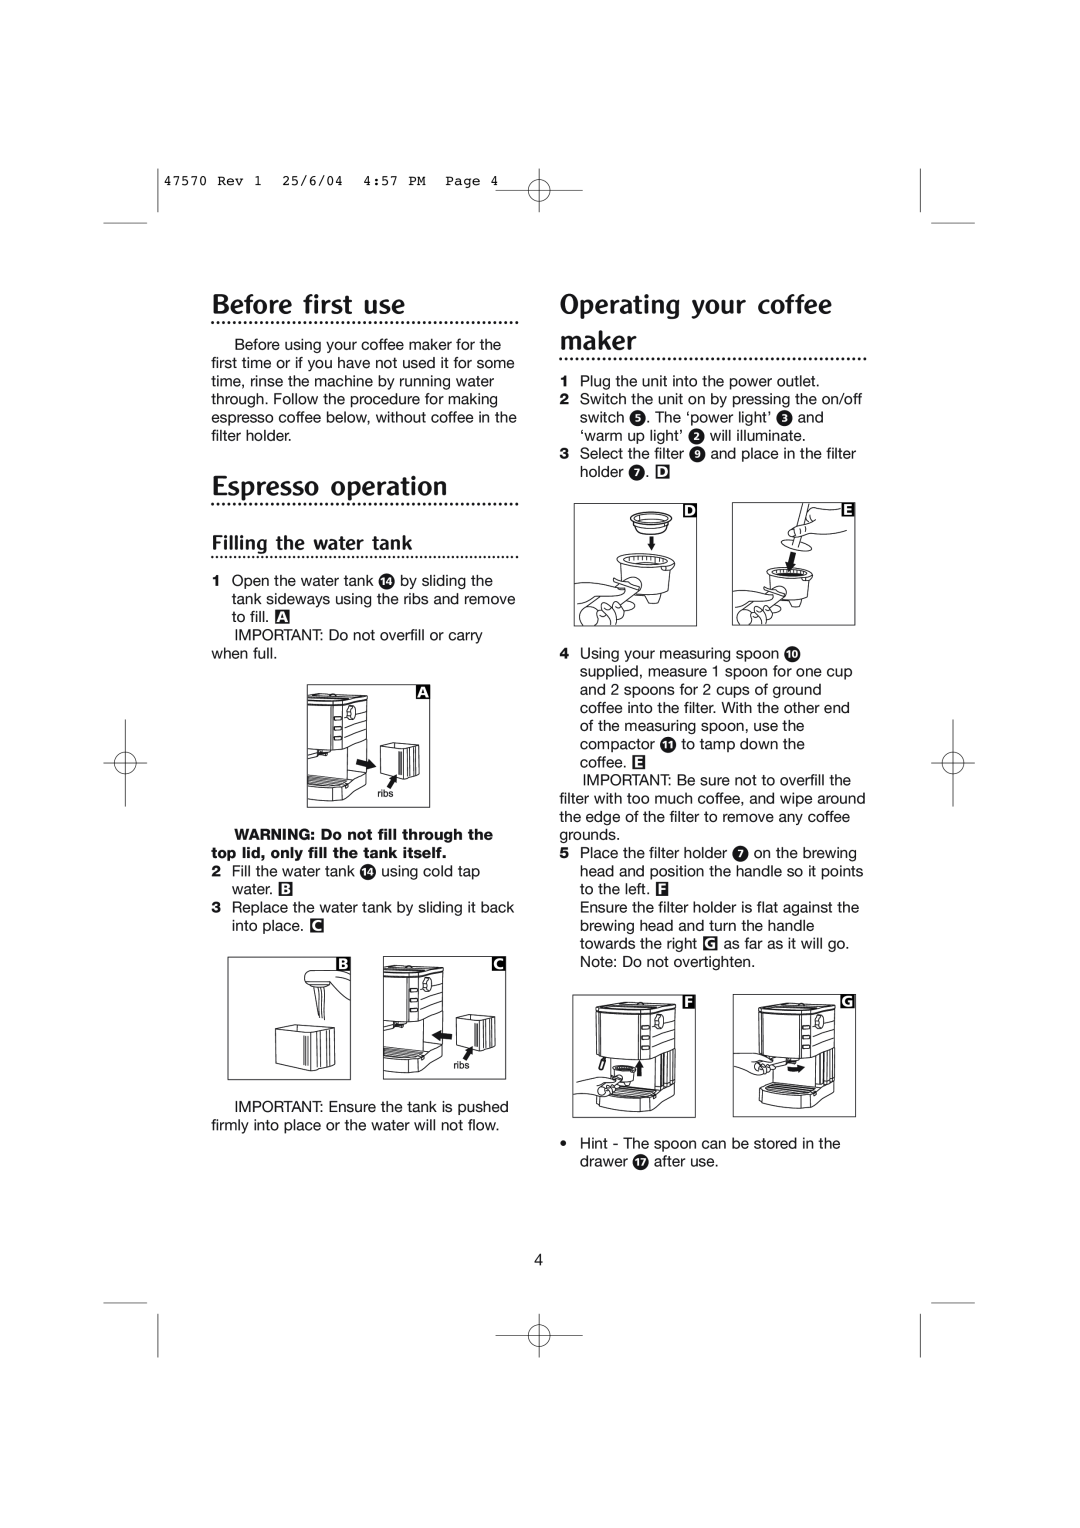 Morphy Richards Pump action espresso manual Before first use, Espresso operation, Operating your coffee maker 